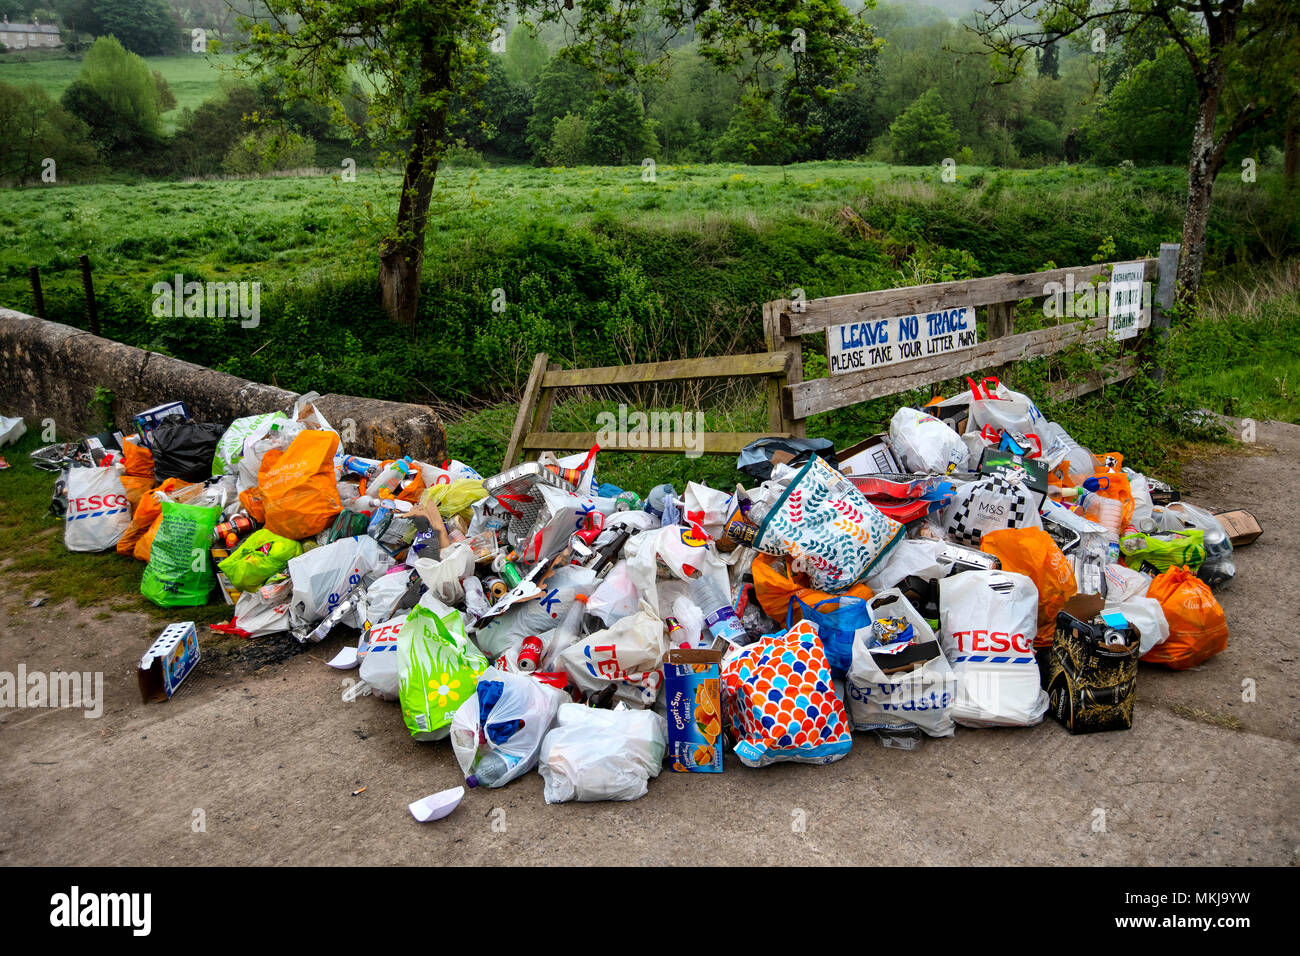 Rubbish left by visitors after the Bank Holiday weekend at beauty spot Warleigh Weir on the River Avon near Bath in Somerset. Stock Photo